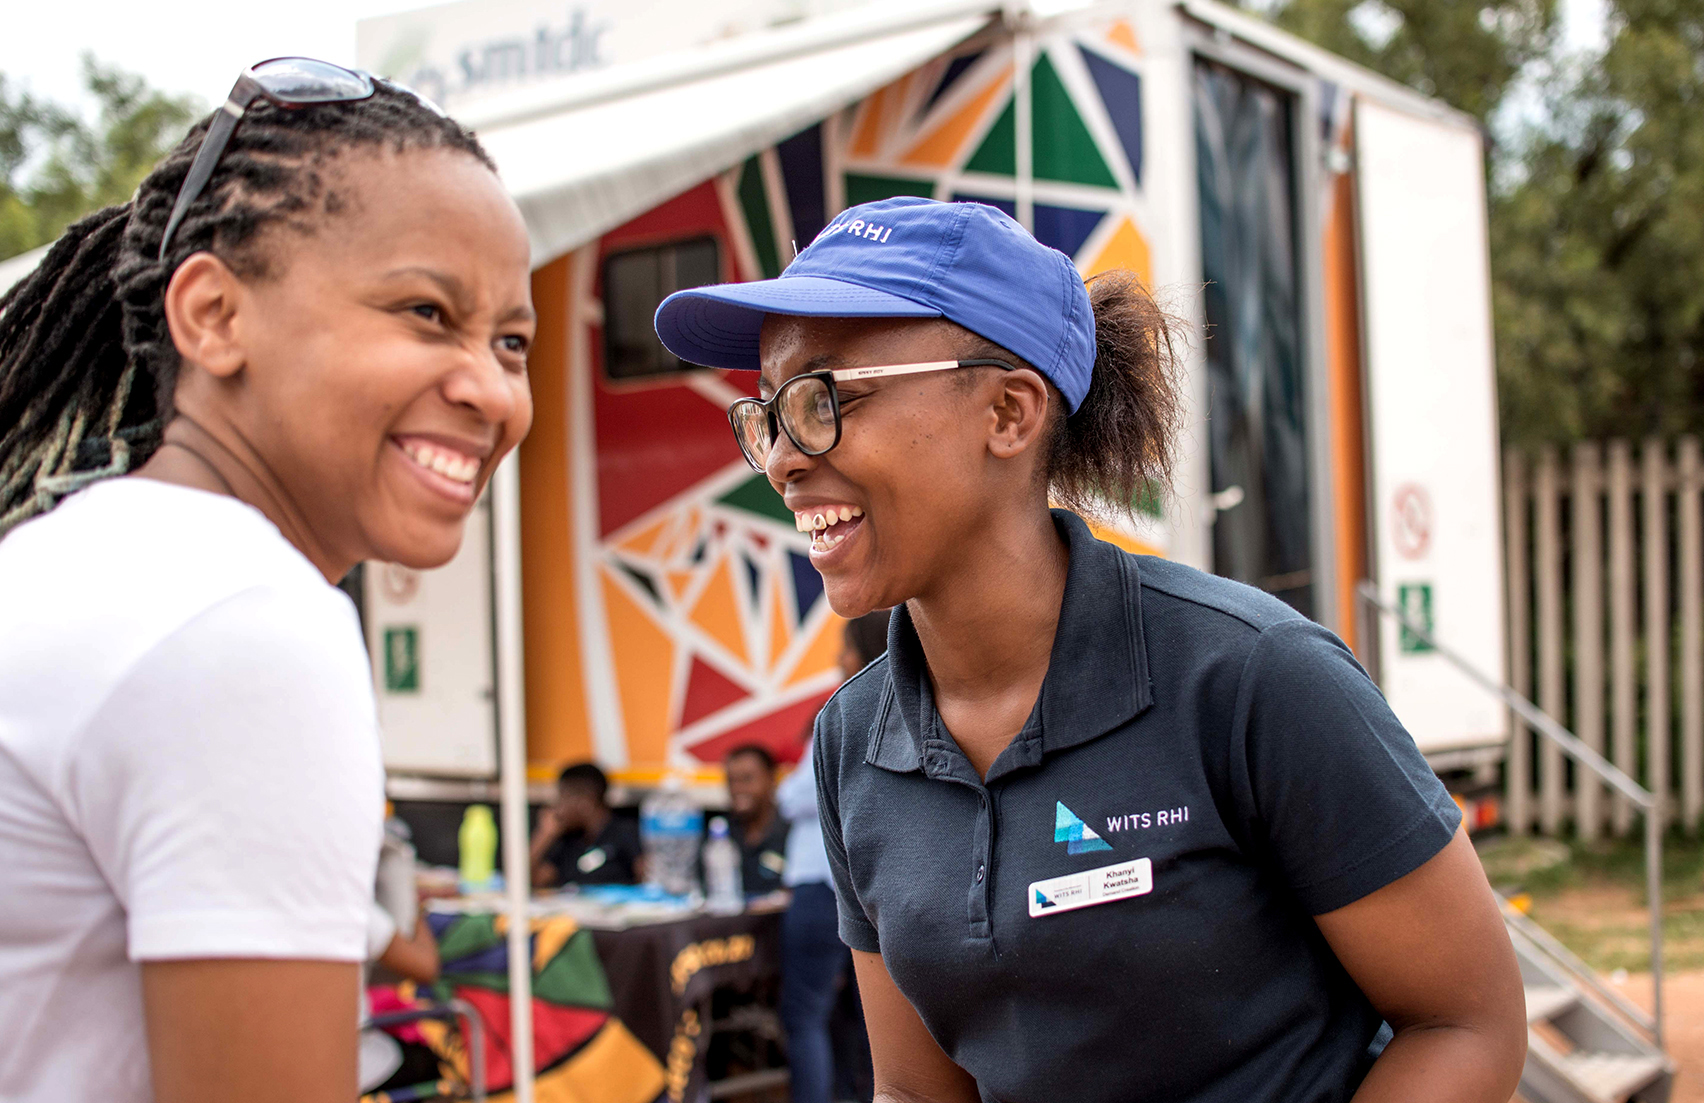 Wits RHI’s mobile PrEP clinic